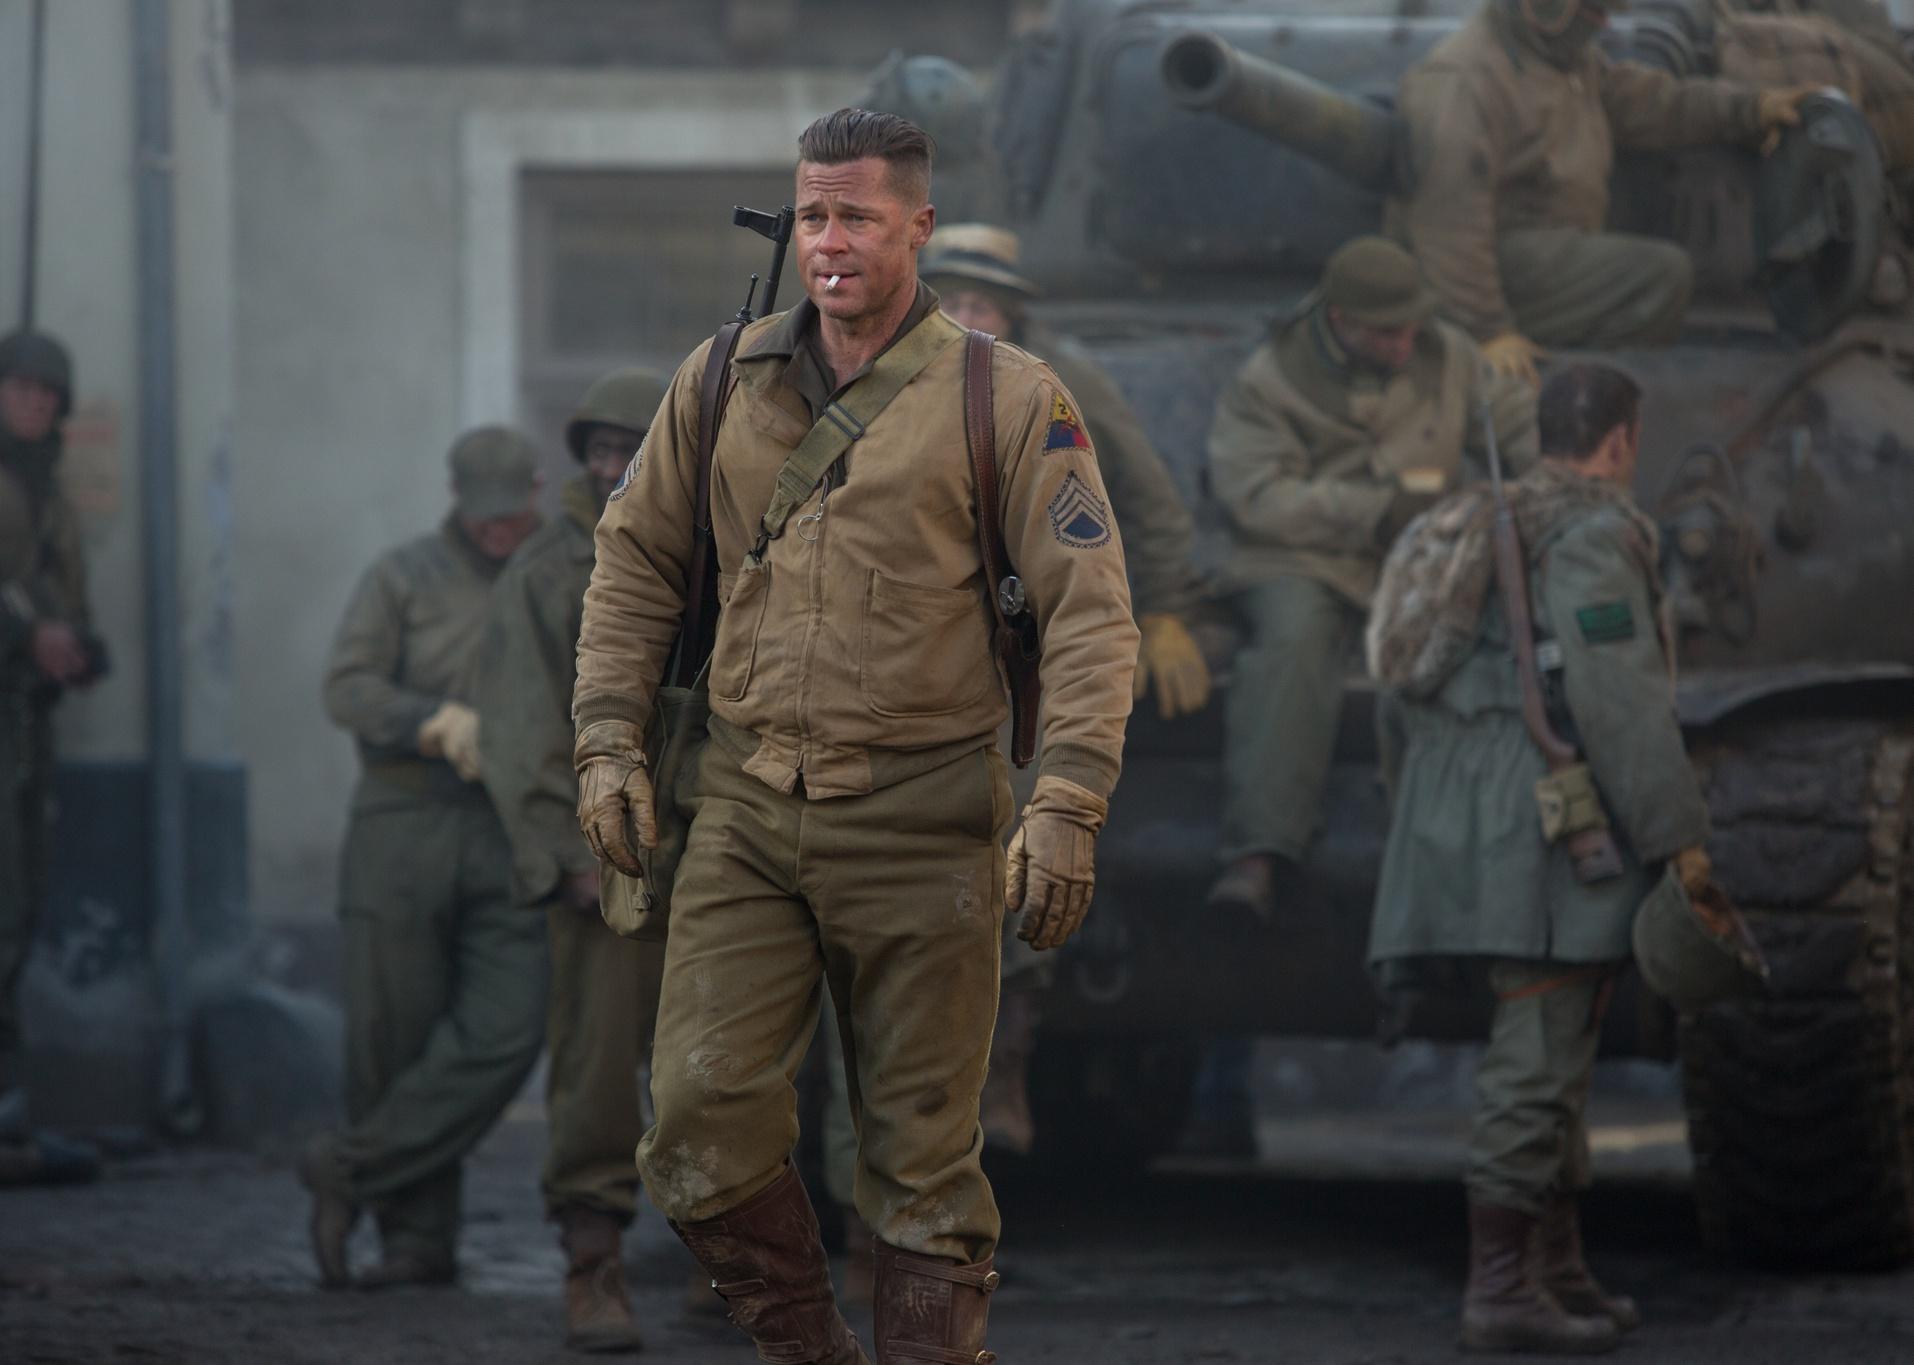 Brad Pitt in 1940s army gear with a gun on his shoulder smoking a cigarette in front of a tank and troops.